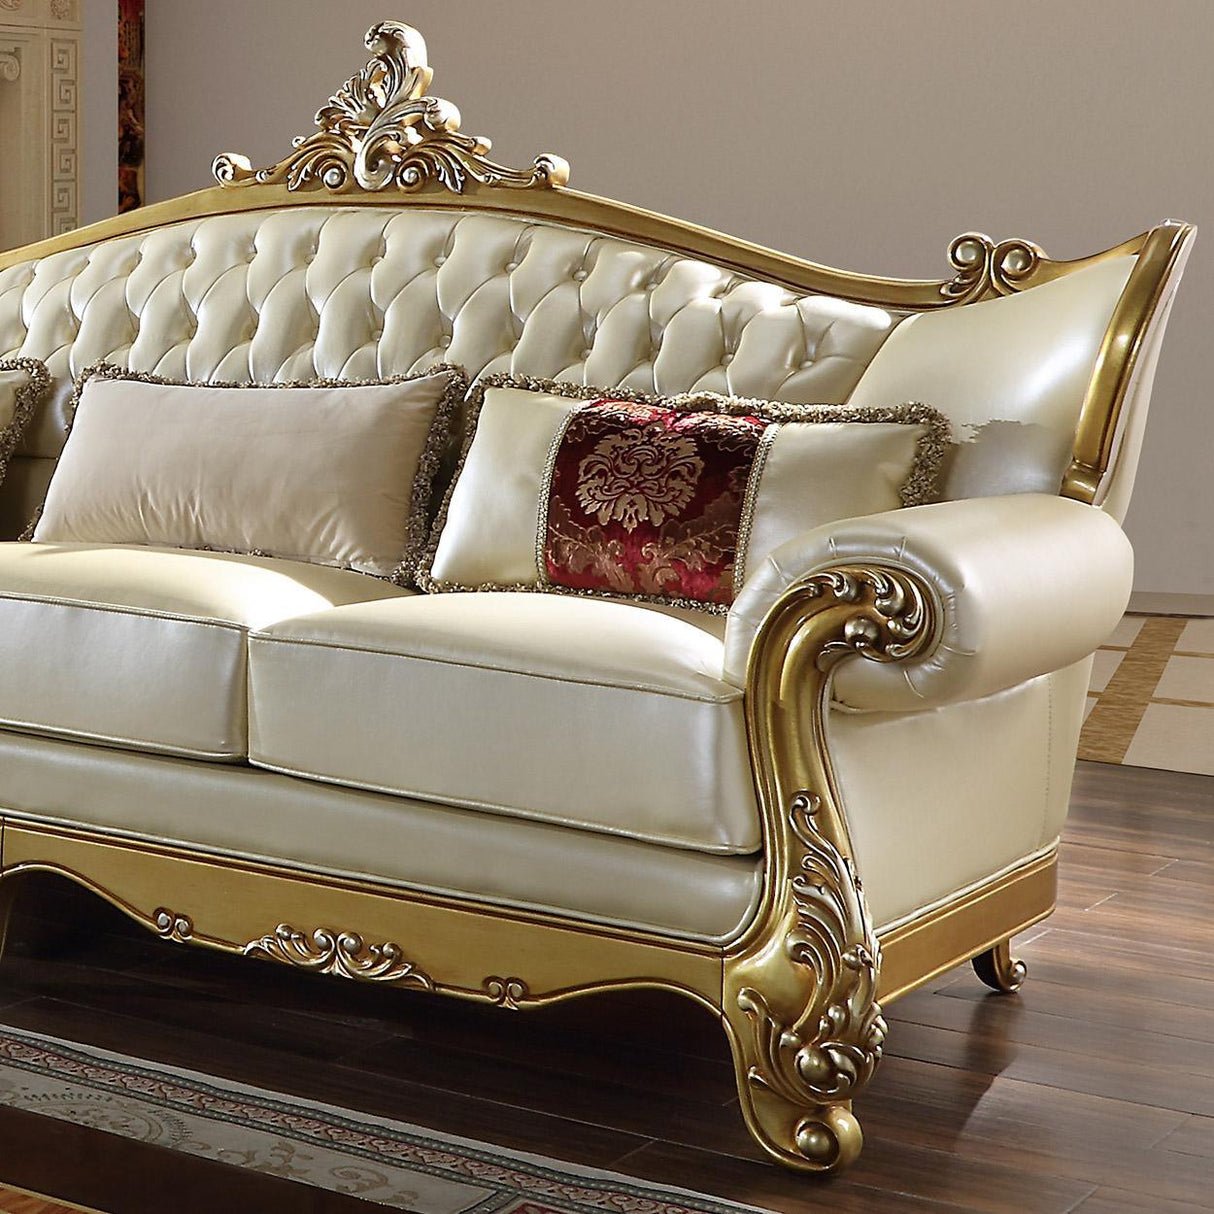 HD-132 Traditional Sectional in Metallic Antique Gold & Pearl Leather by Homey Design Homey Design Furniture